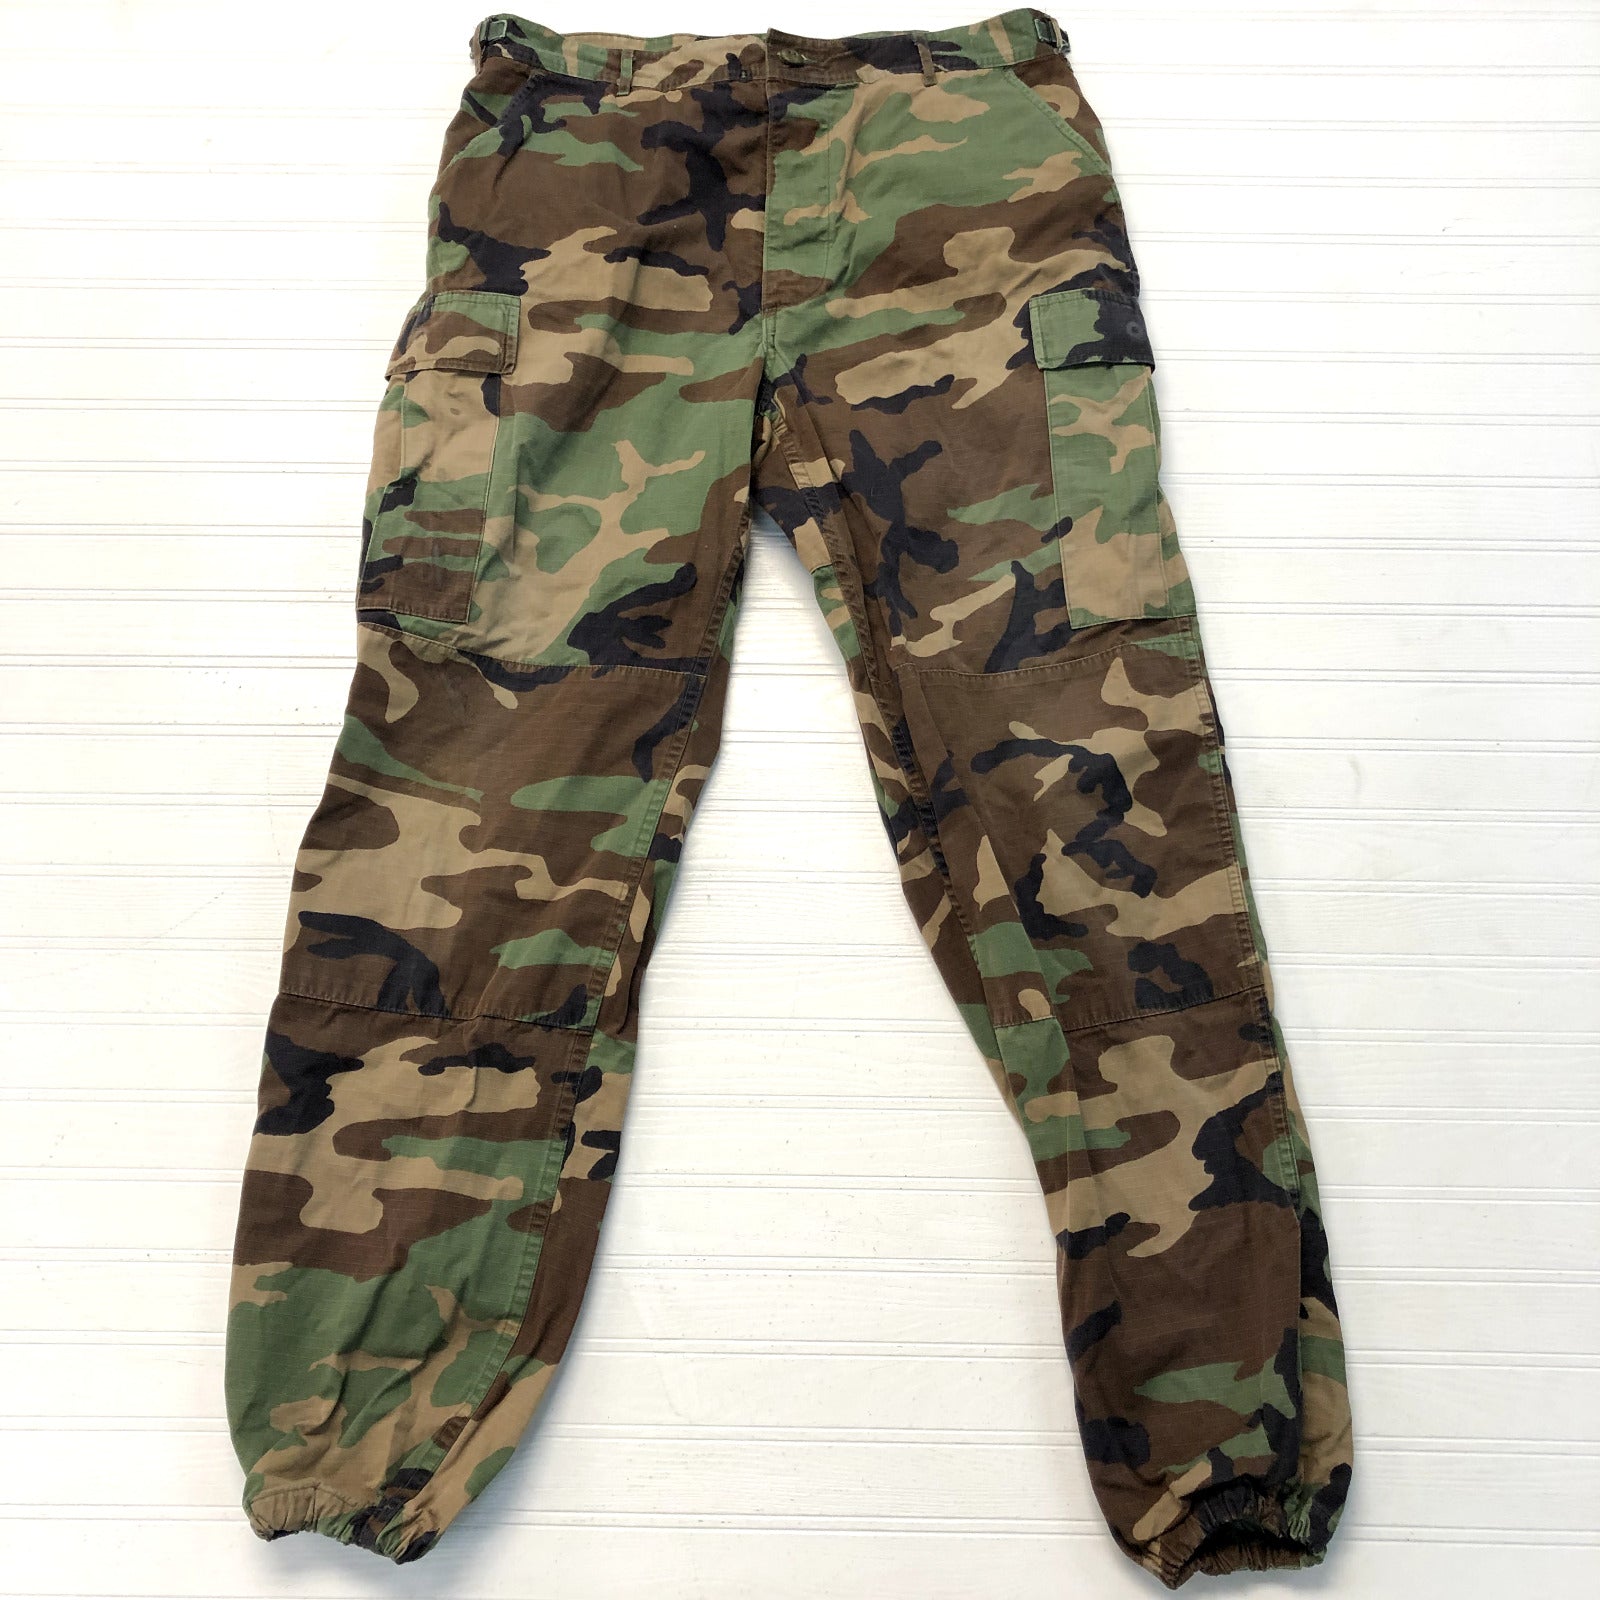 Vintage Military Brown & Green Camouflage Cargo Pocket Zip Pants Adult Size L